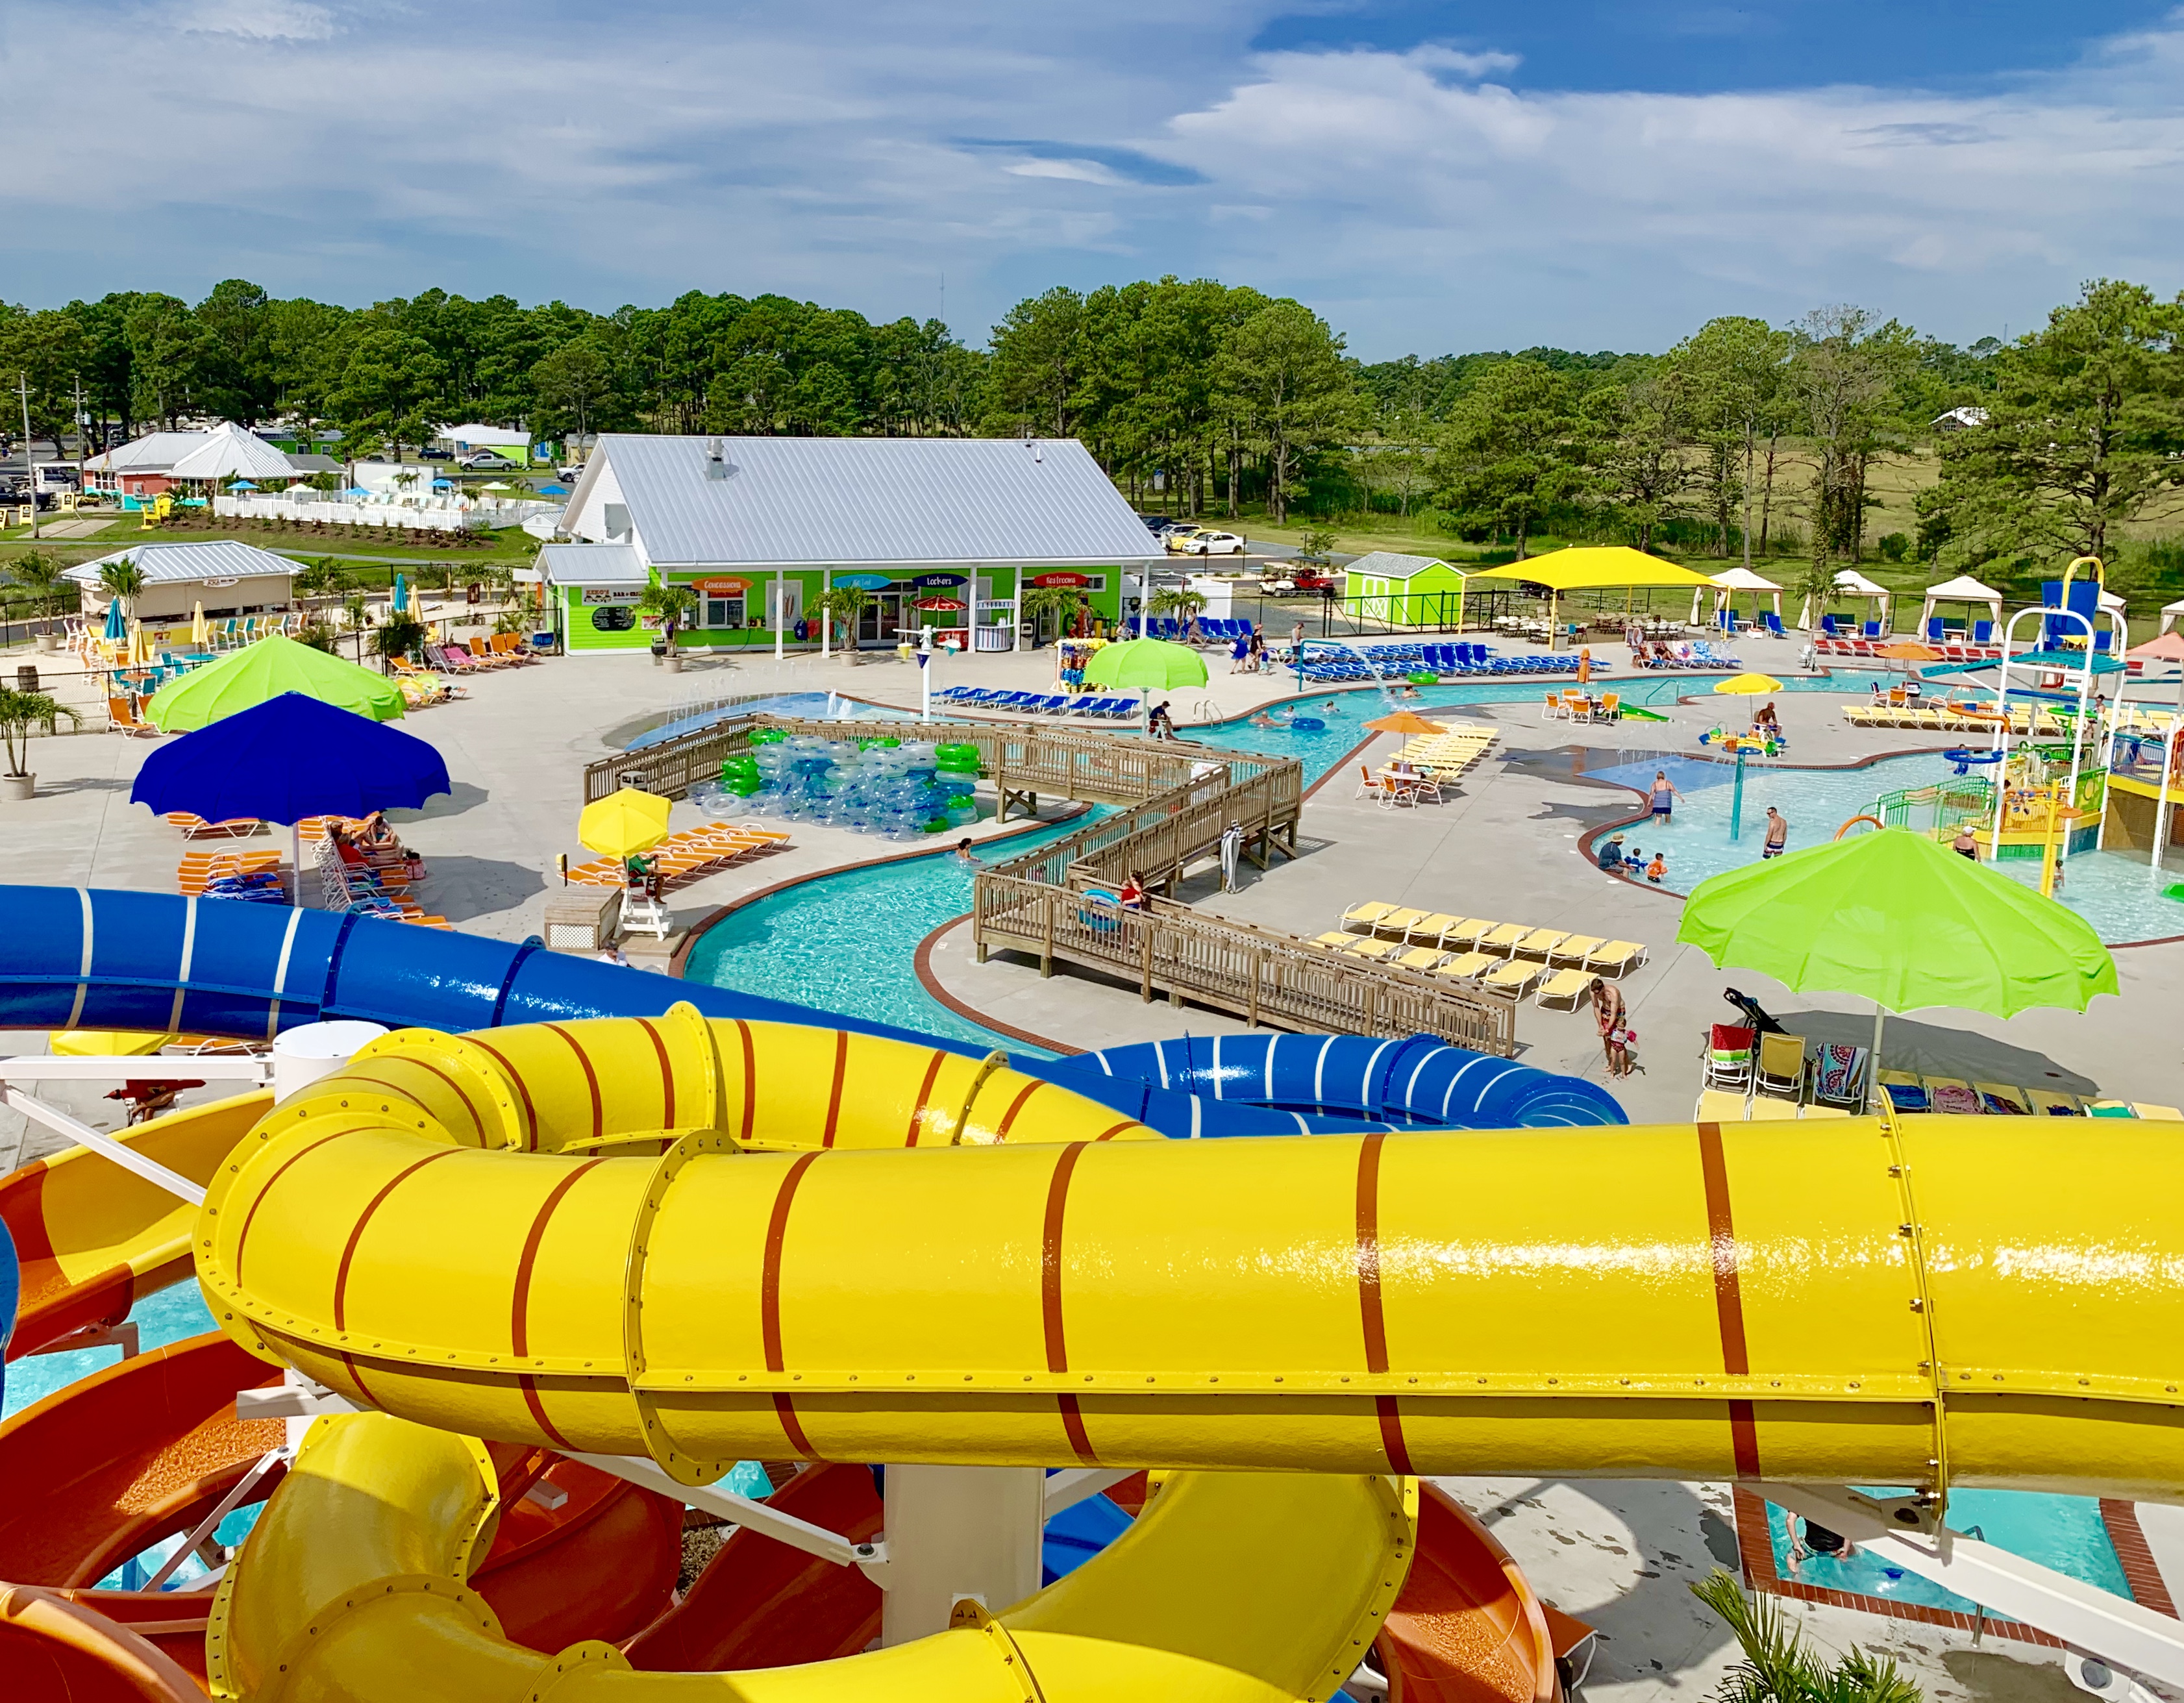 Maui Jack’s Water Park Chincoteague Island, VA Been There Done That